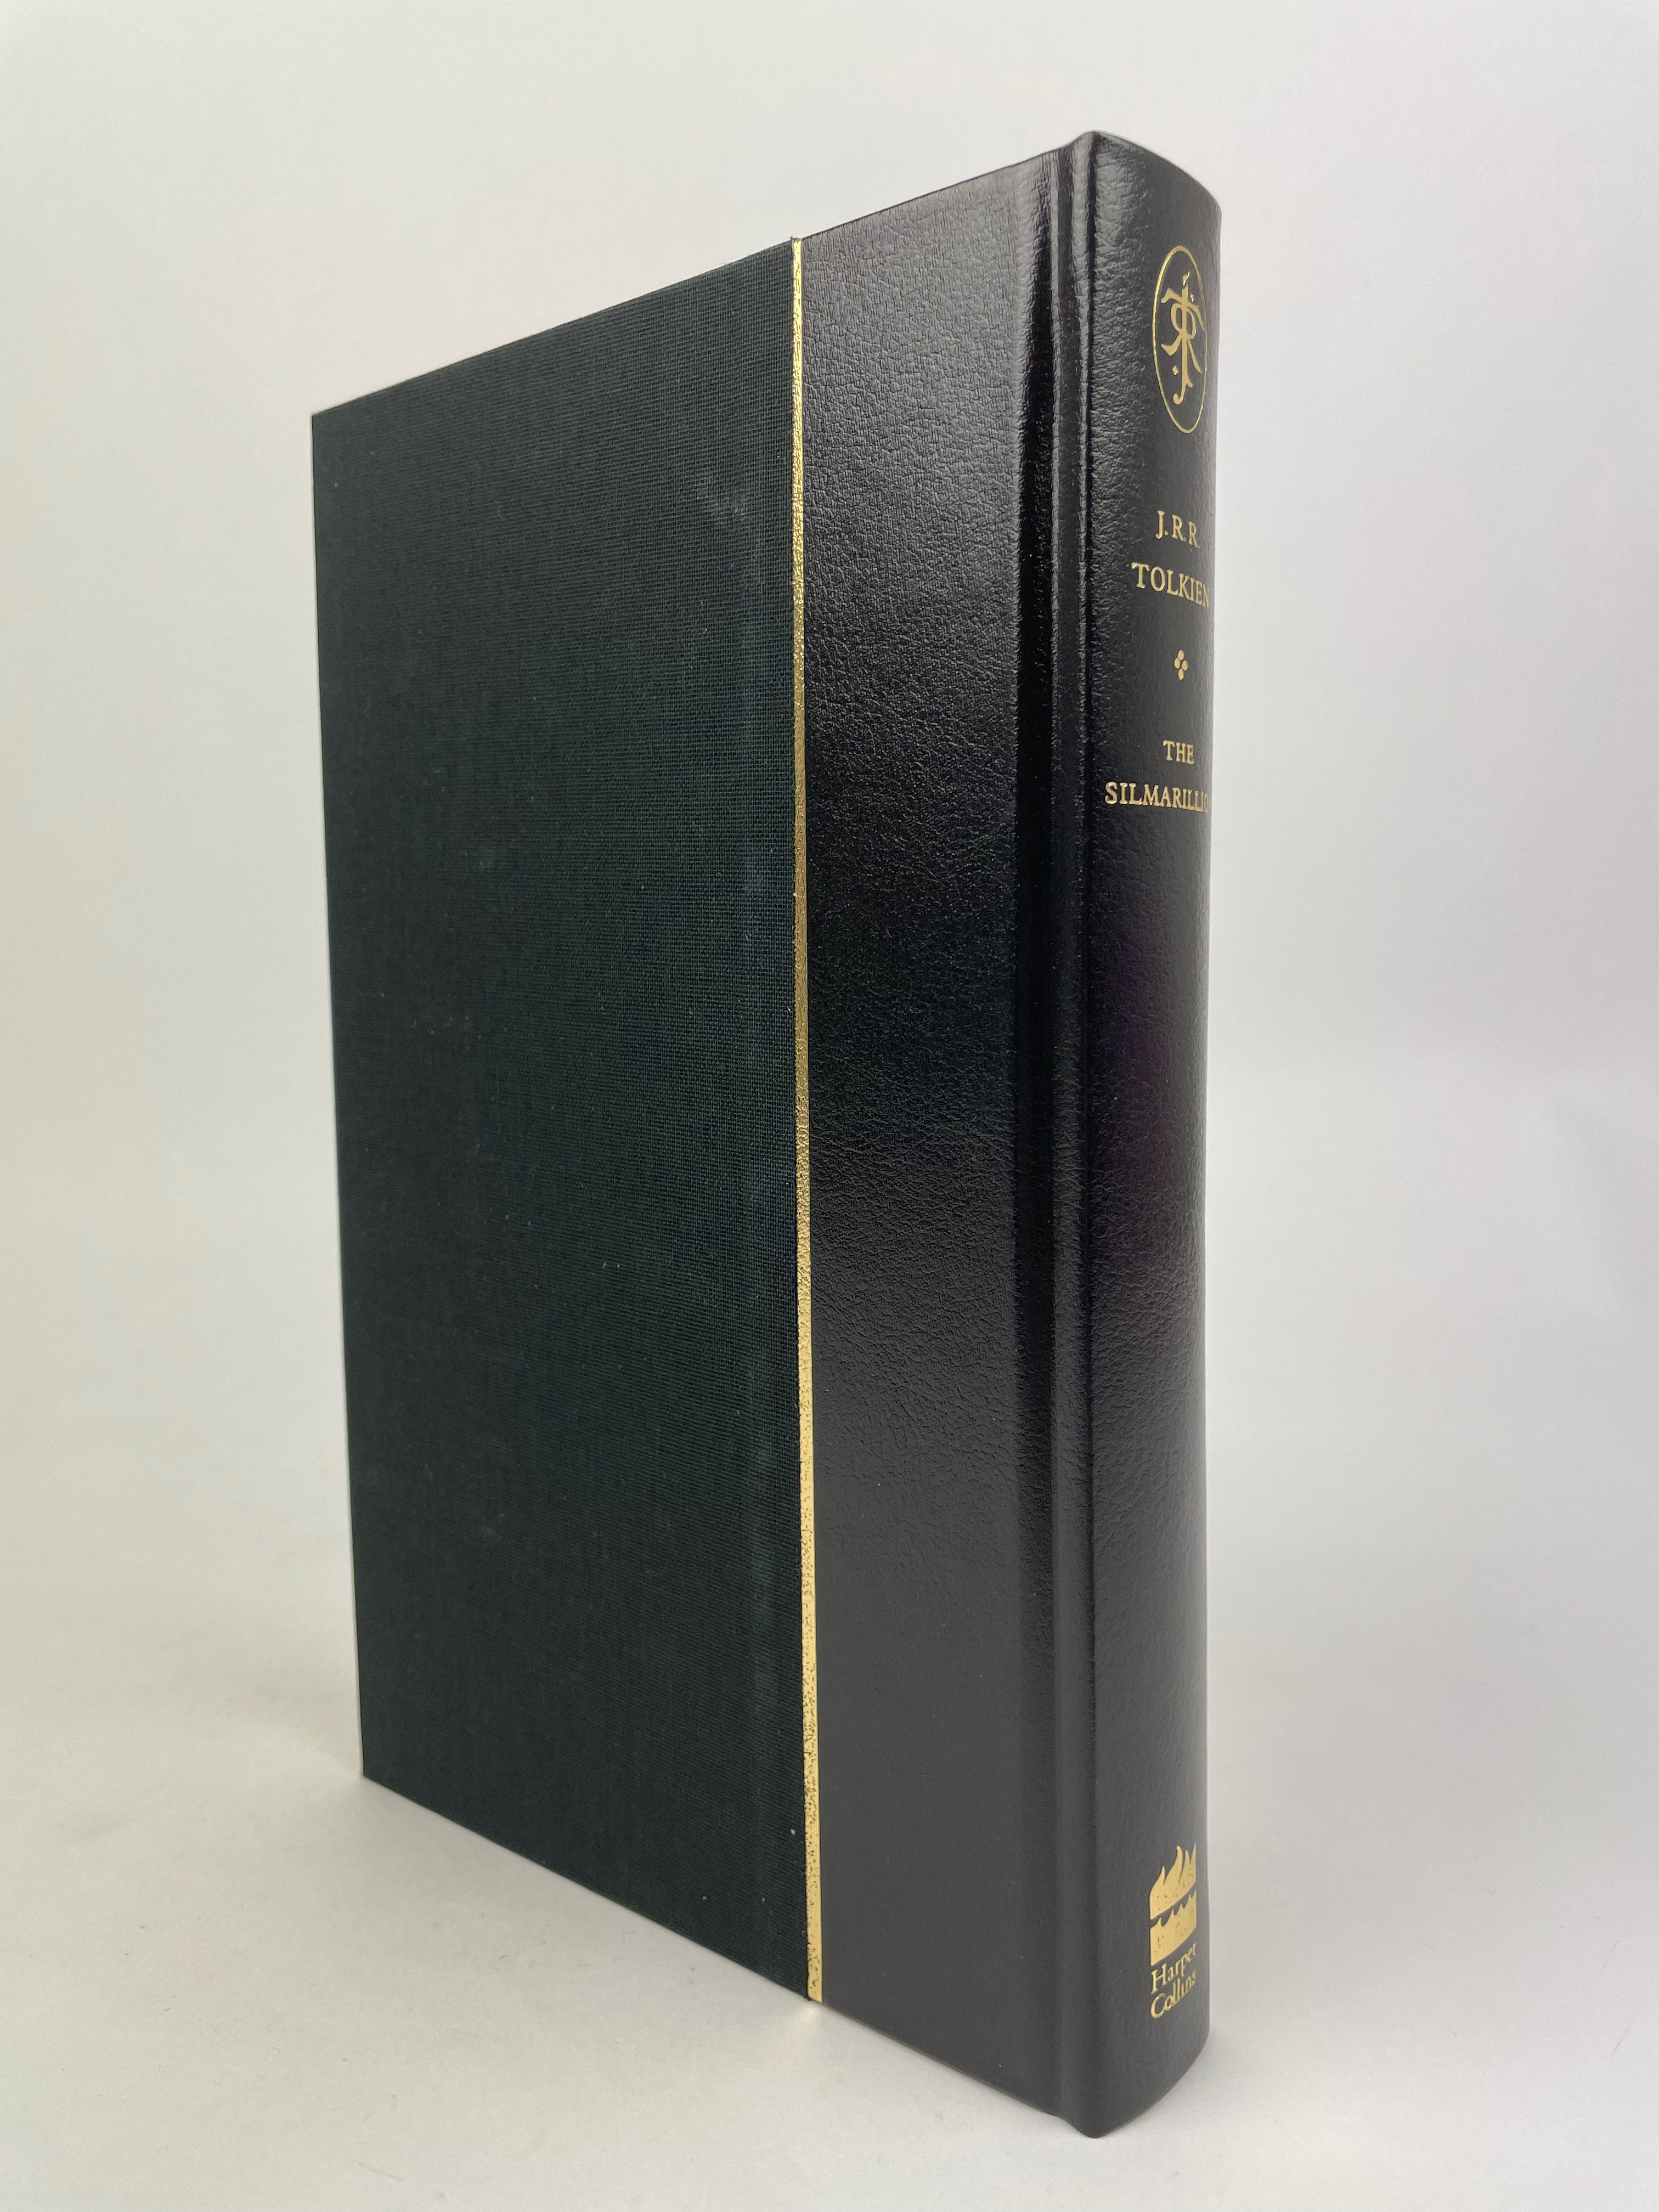 
Black Limited De Luxe edition of the Silmarillion 2002 6